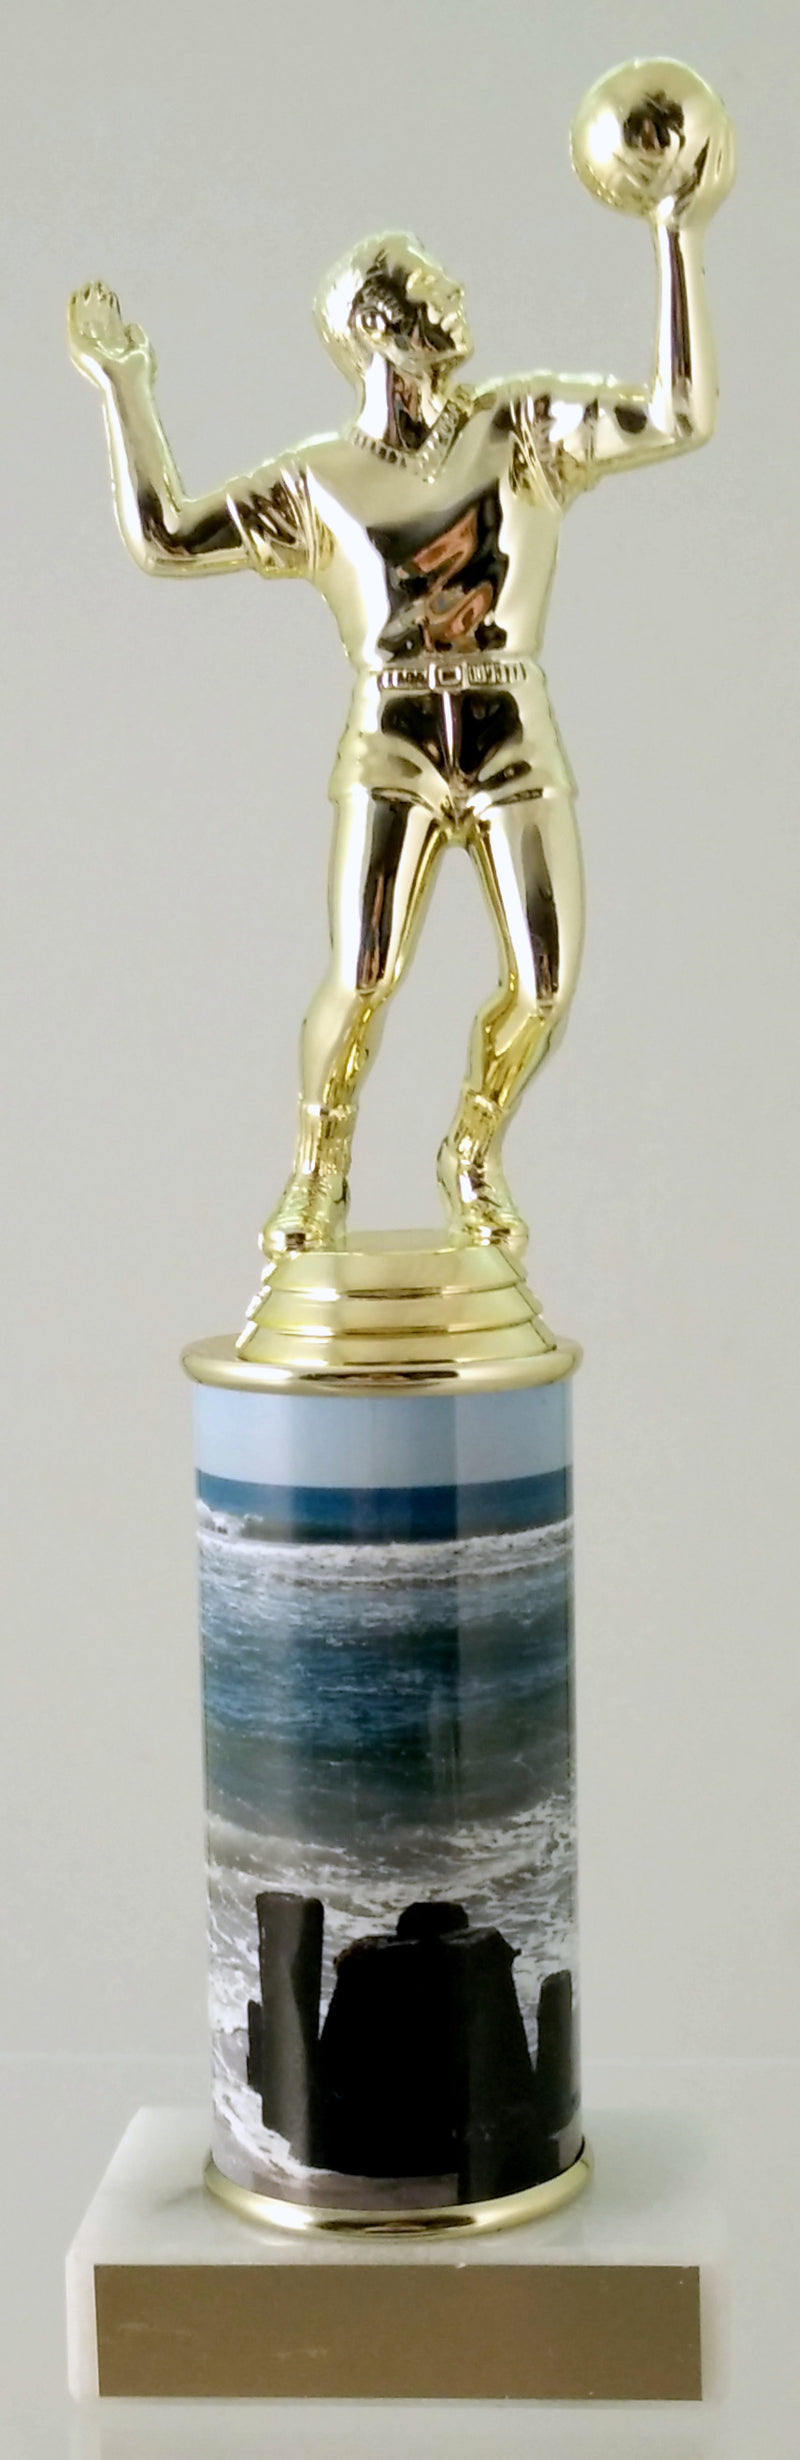 Volleyball Trophy With Beach Metal Column On Marble-Trophy-Schoppy&